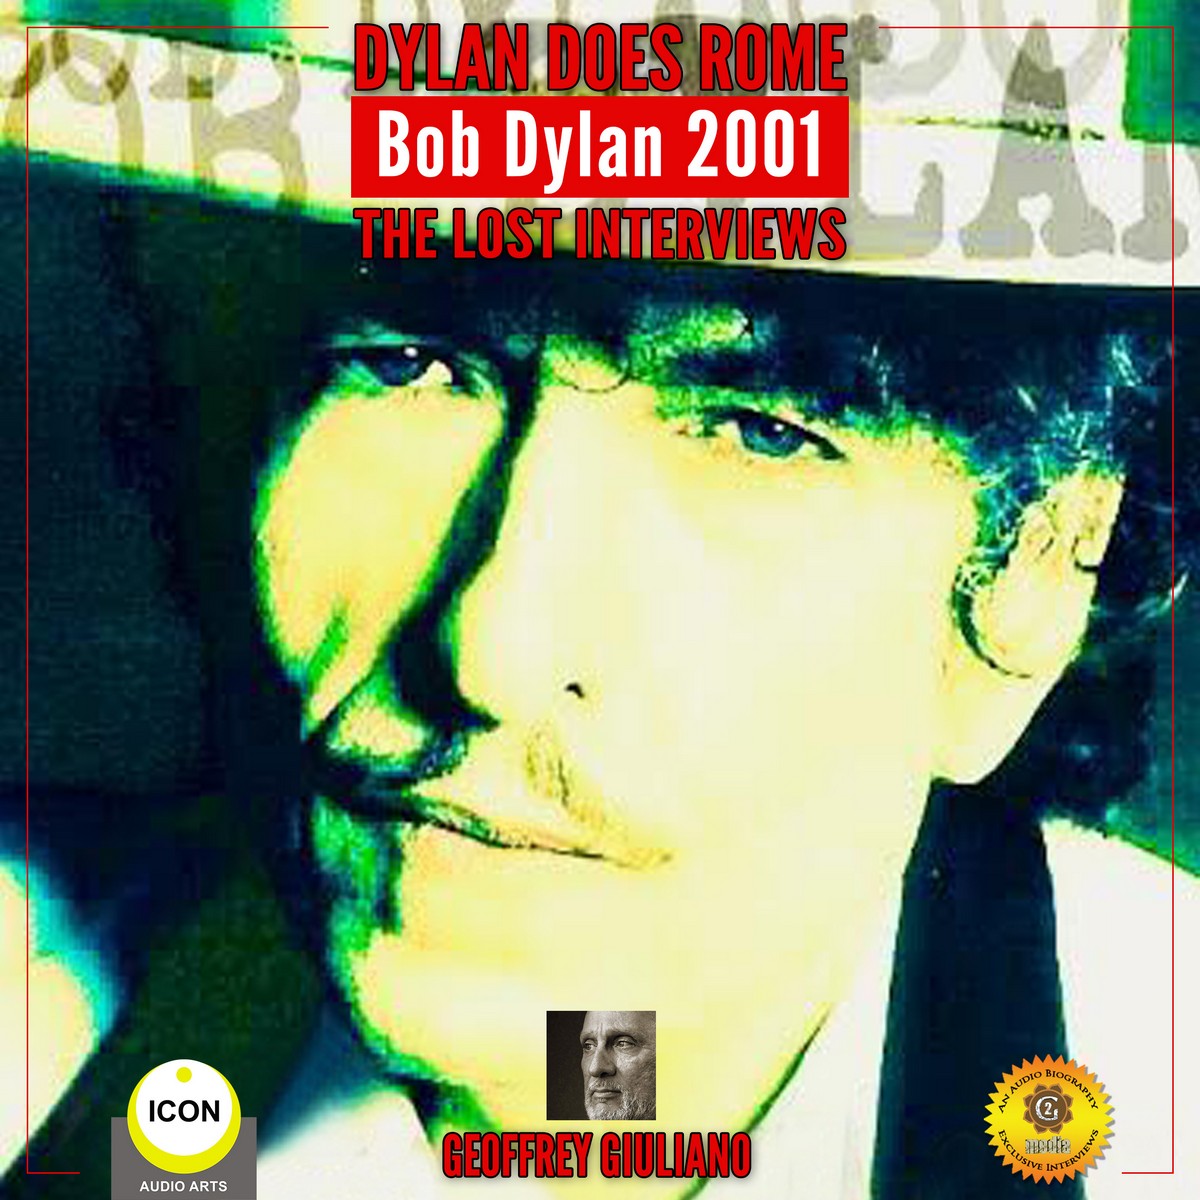 Dylan Does Rome Bob Dylan 2001 – The Lost Interviews